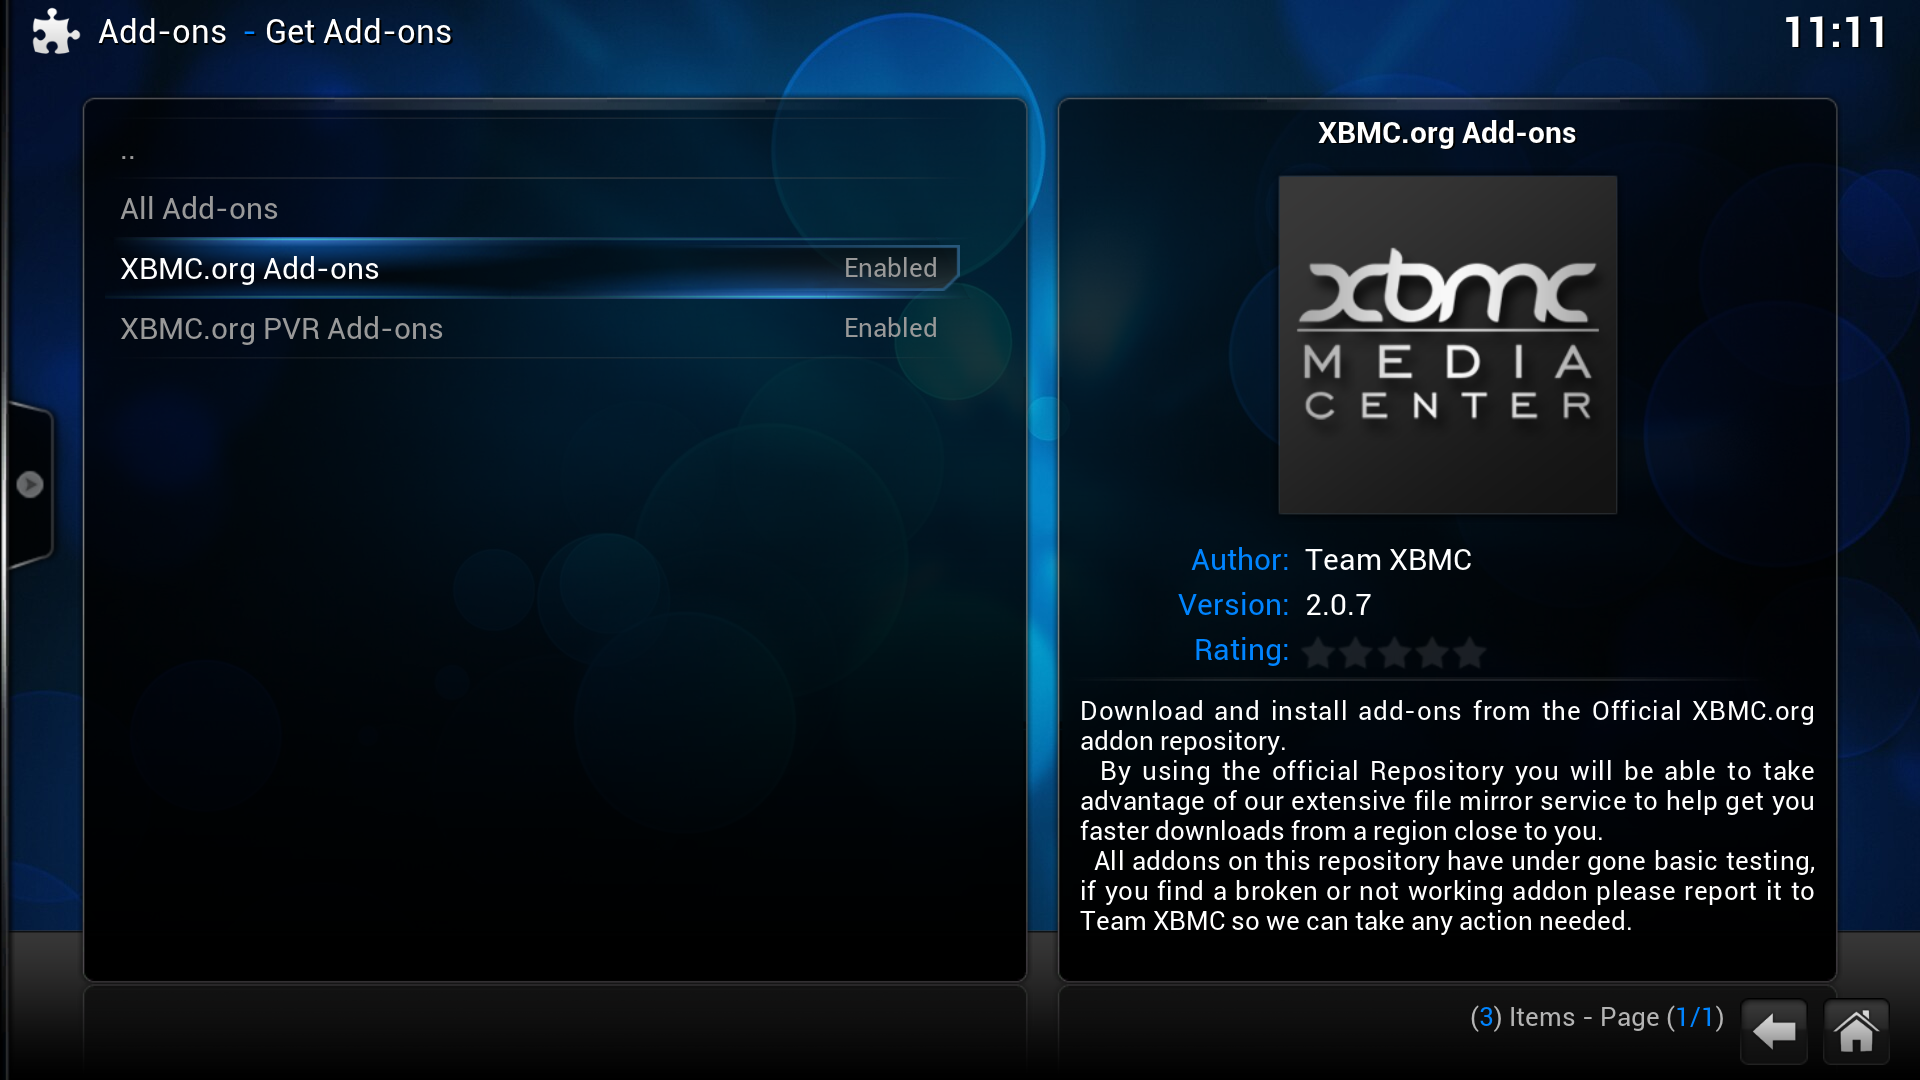 Step 2: Select the repository you want to install from. XBMC.org Add-ons and XBMC.org PVR Add-ons are the two official add-on repositories. (see How to install additional add-on repositories for more)